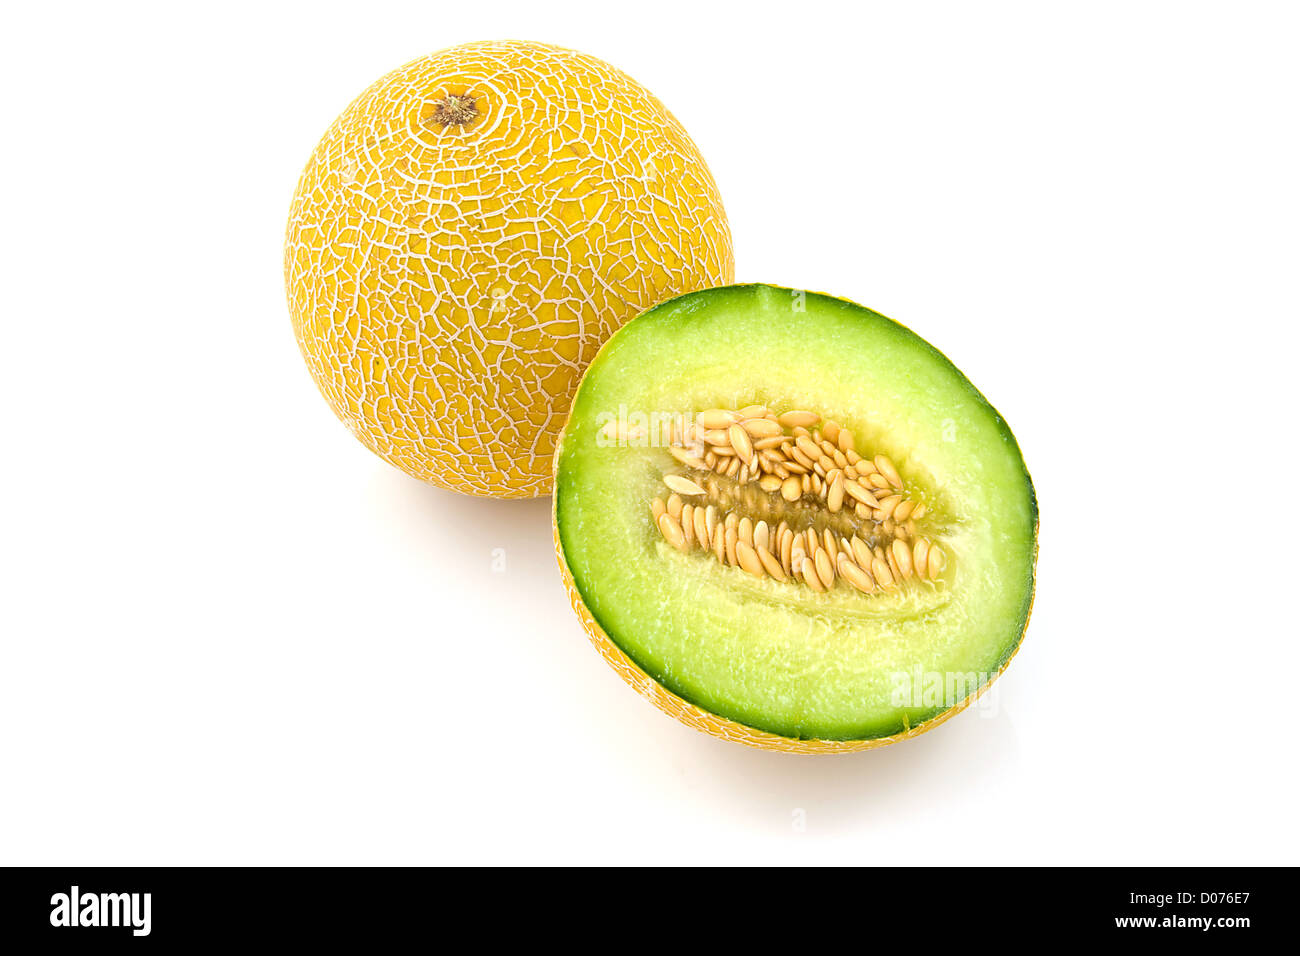 Whole and half fresh yellow melon over white background Stock Photo